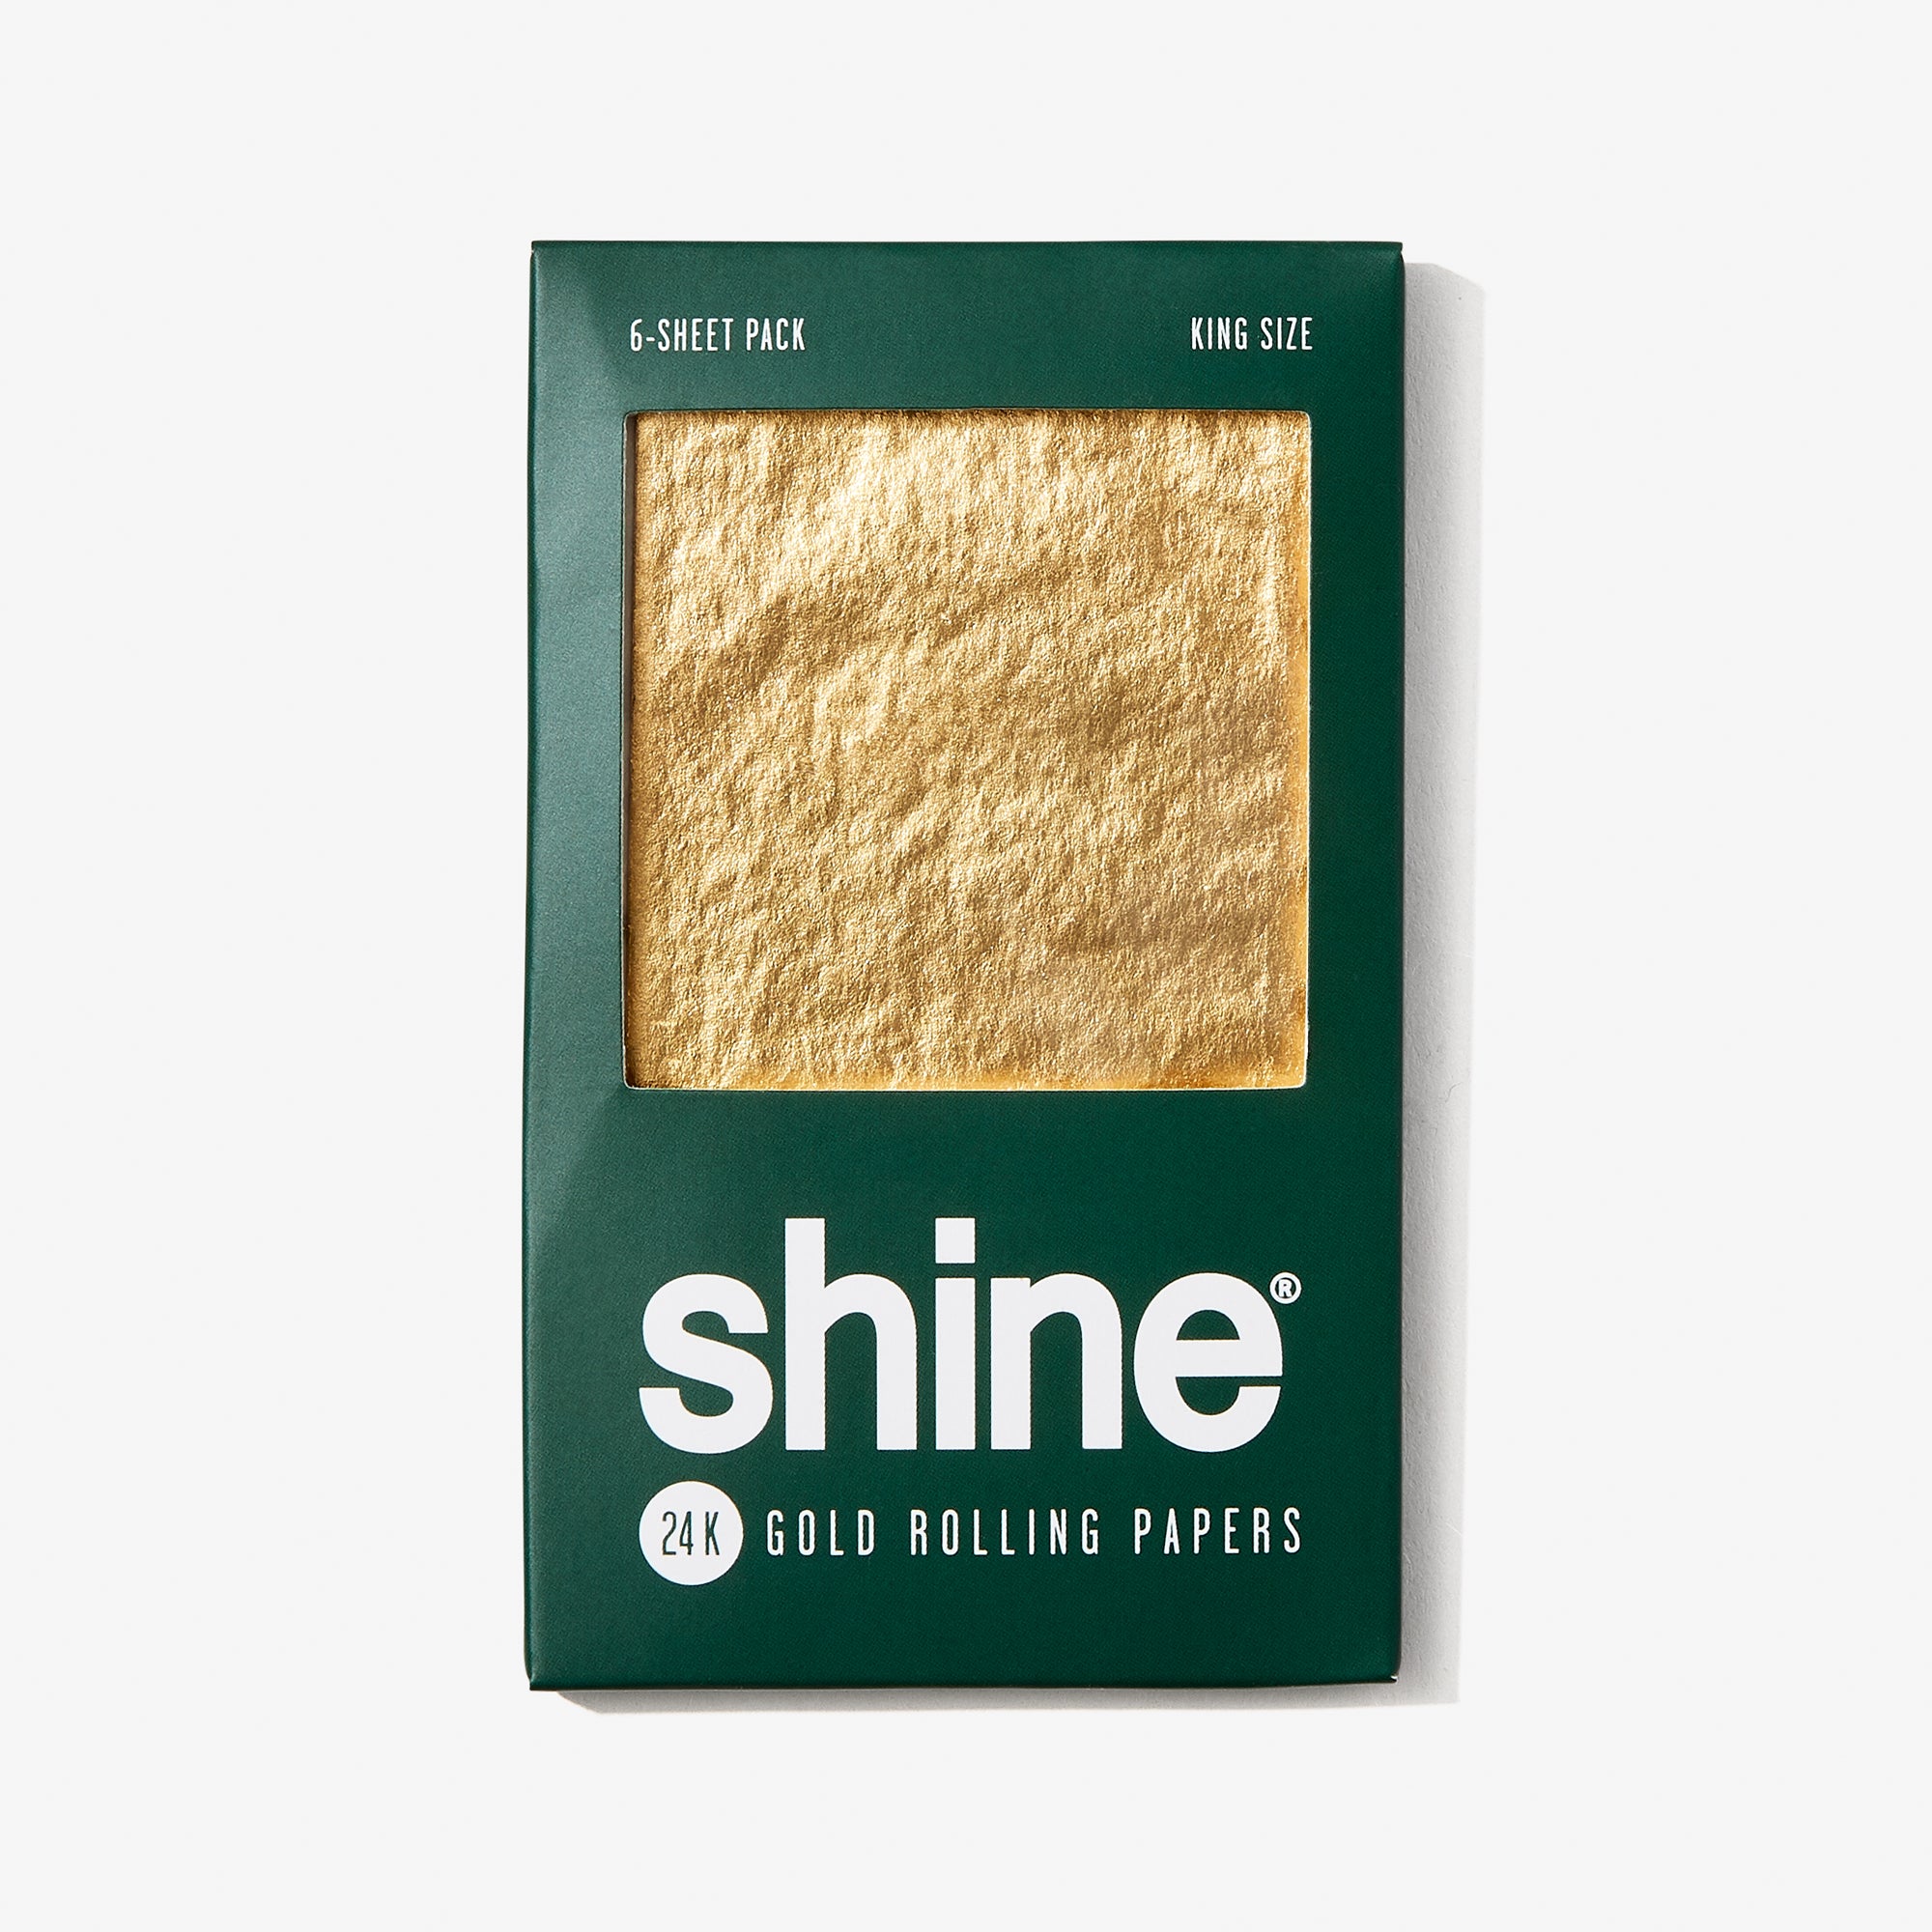 SHINE 24K GOLD KING SIZE 6 SHEET PACK  ROLLING PAPERS